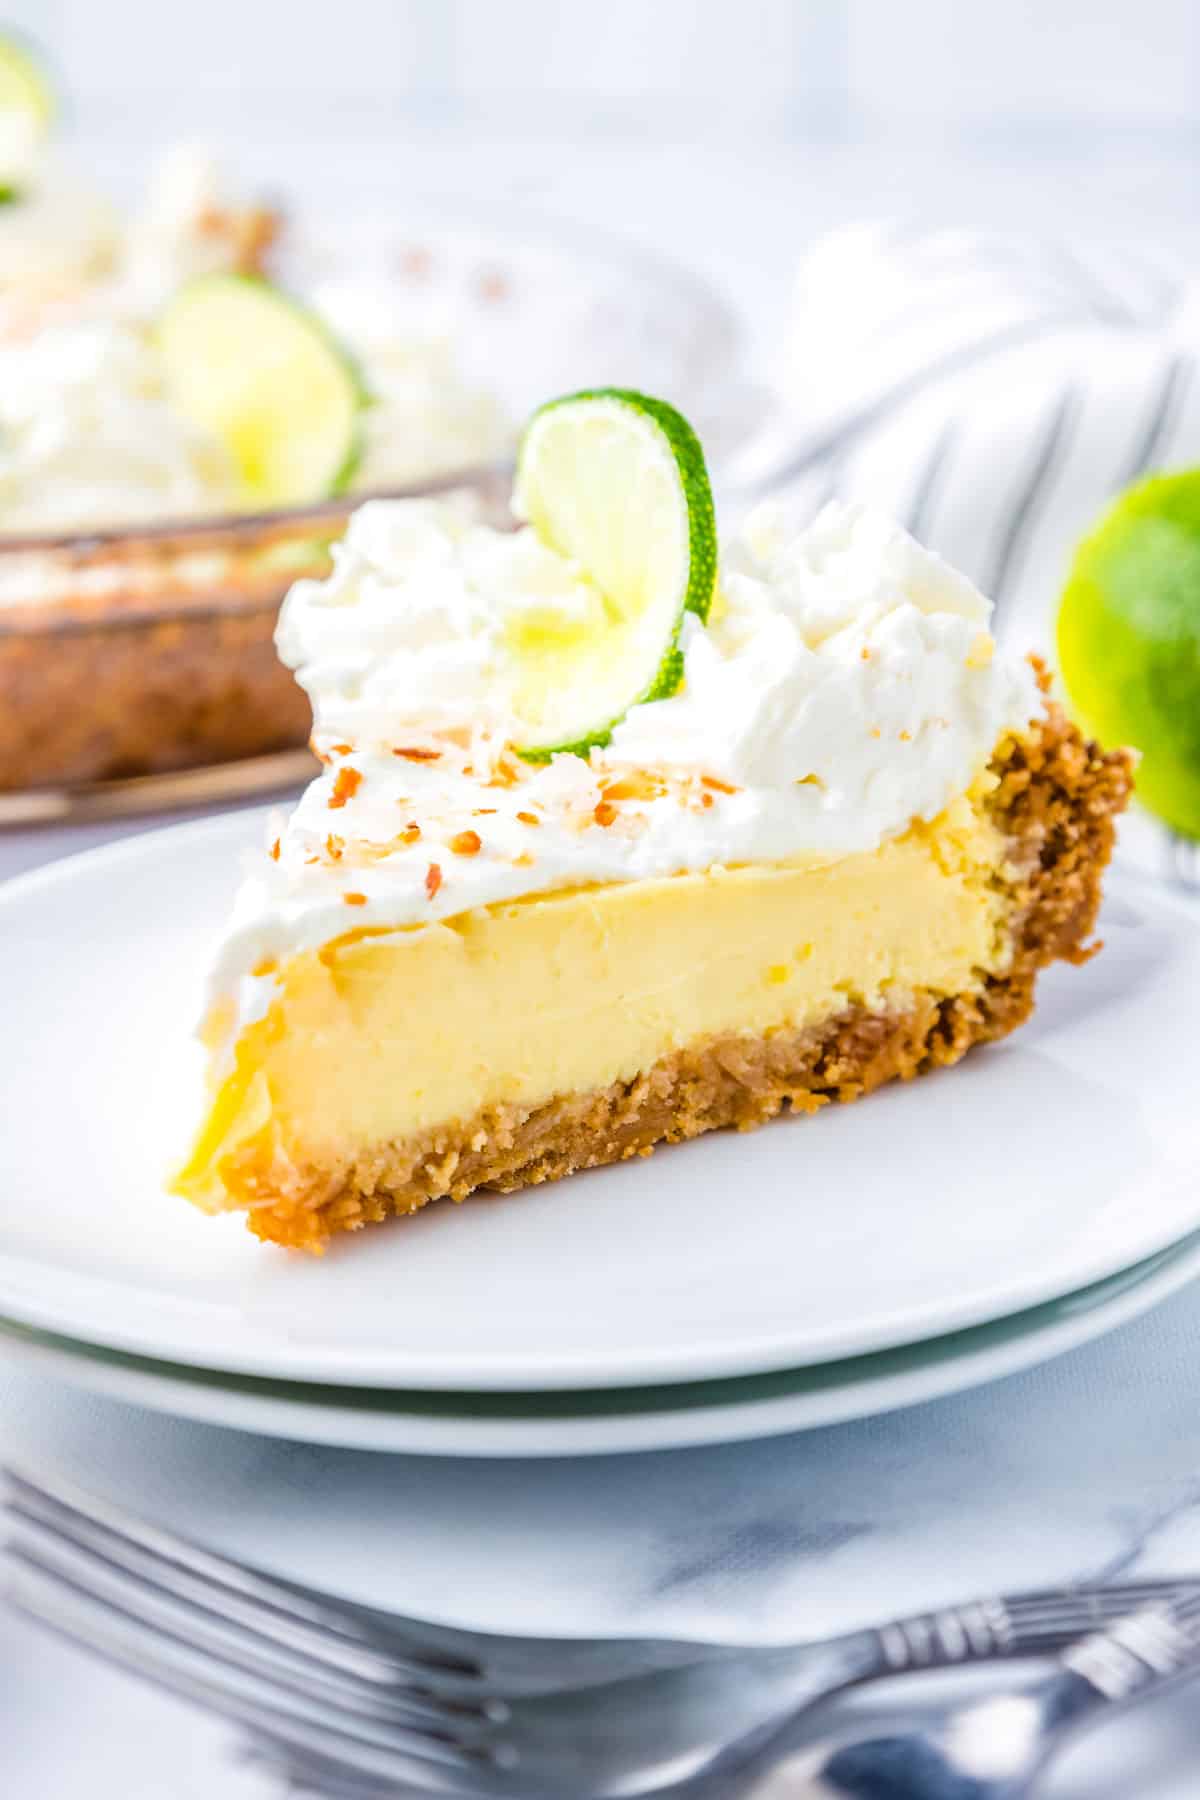 A slice of Key Lime Pie on a white plate.